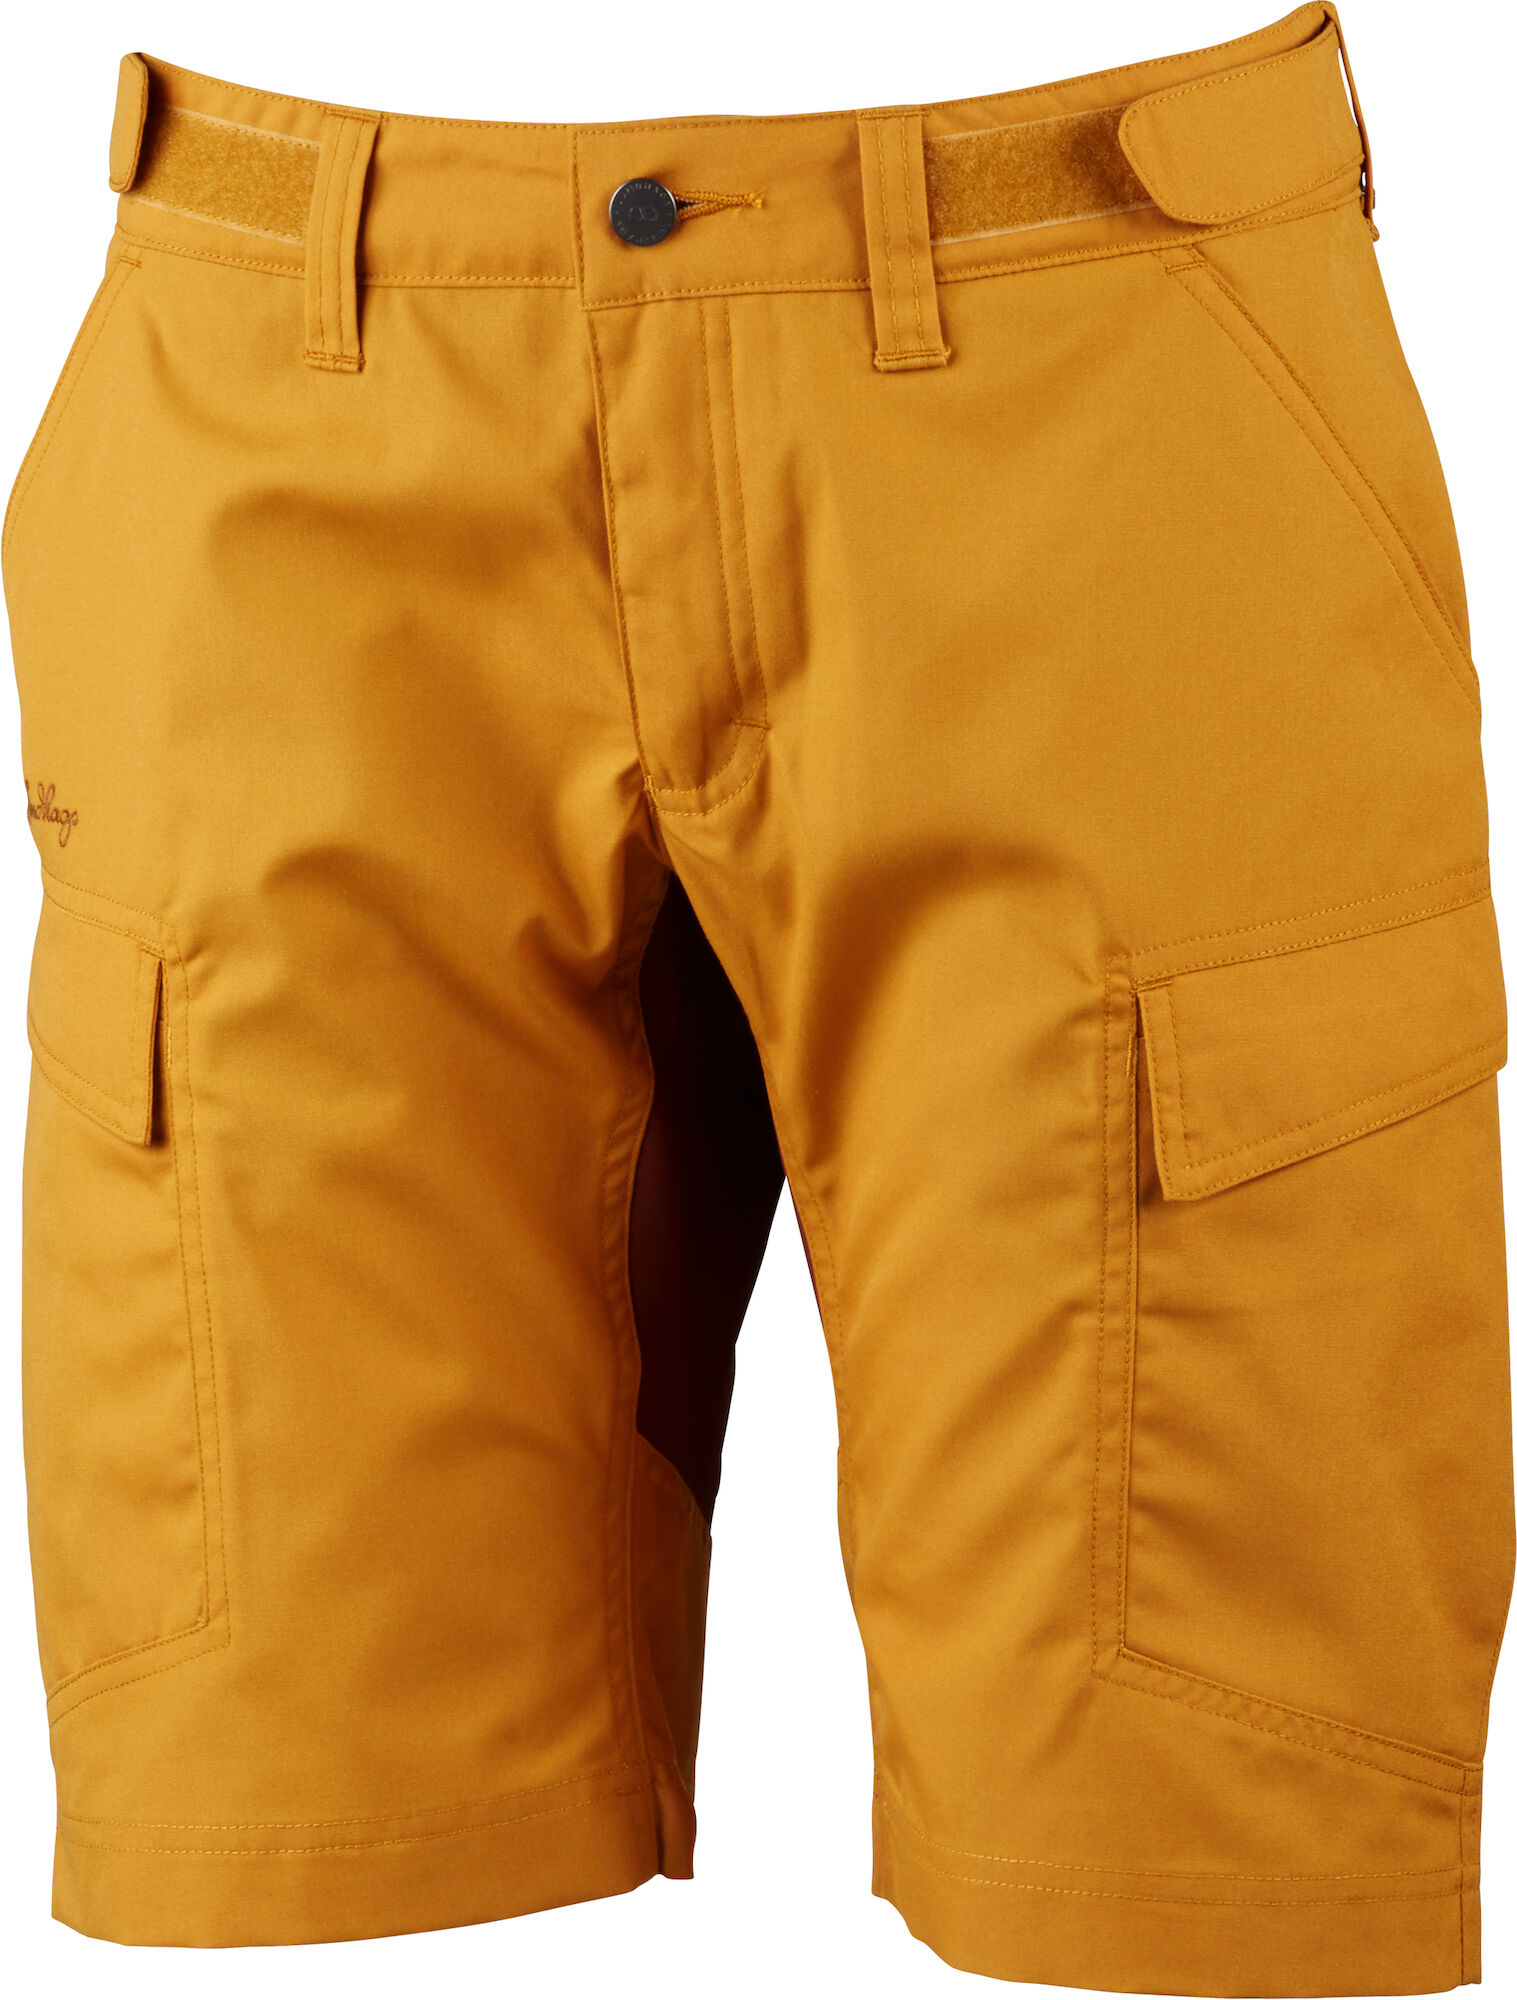 Vanner Ws Shorts Gold/Rust